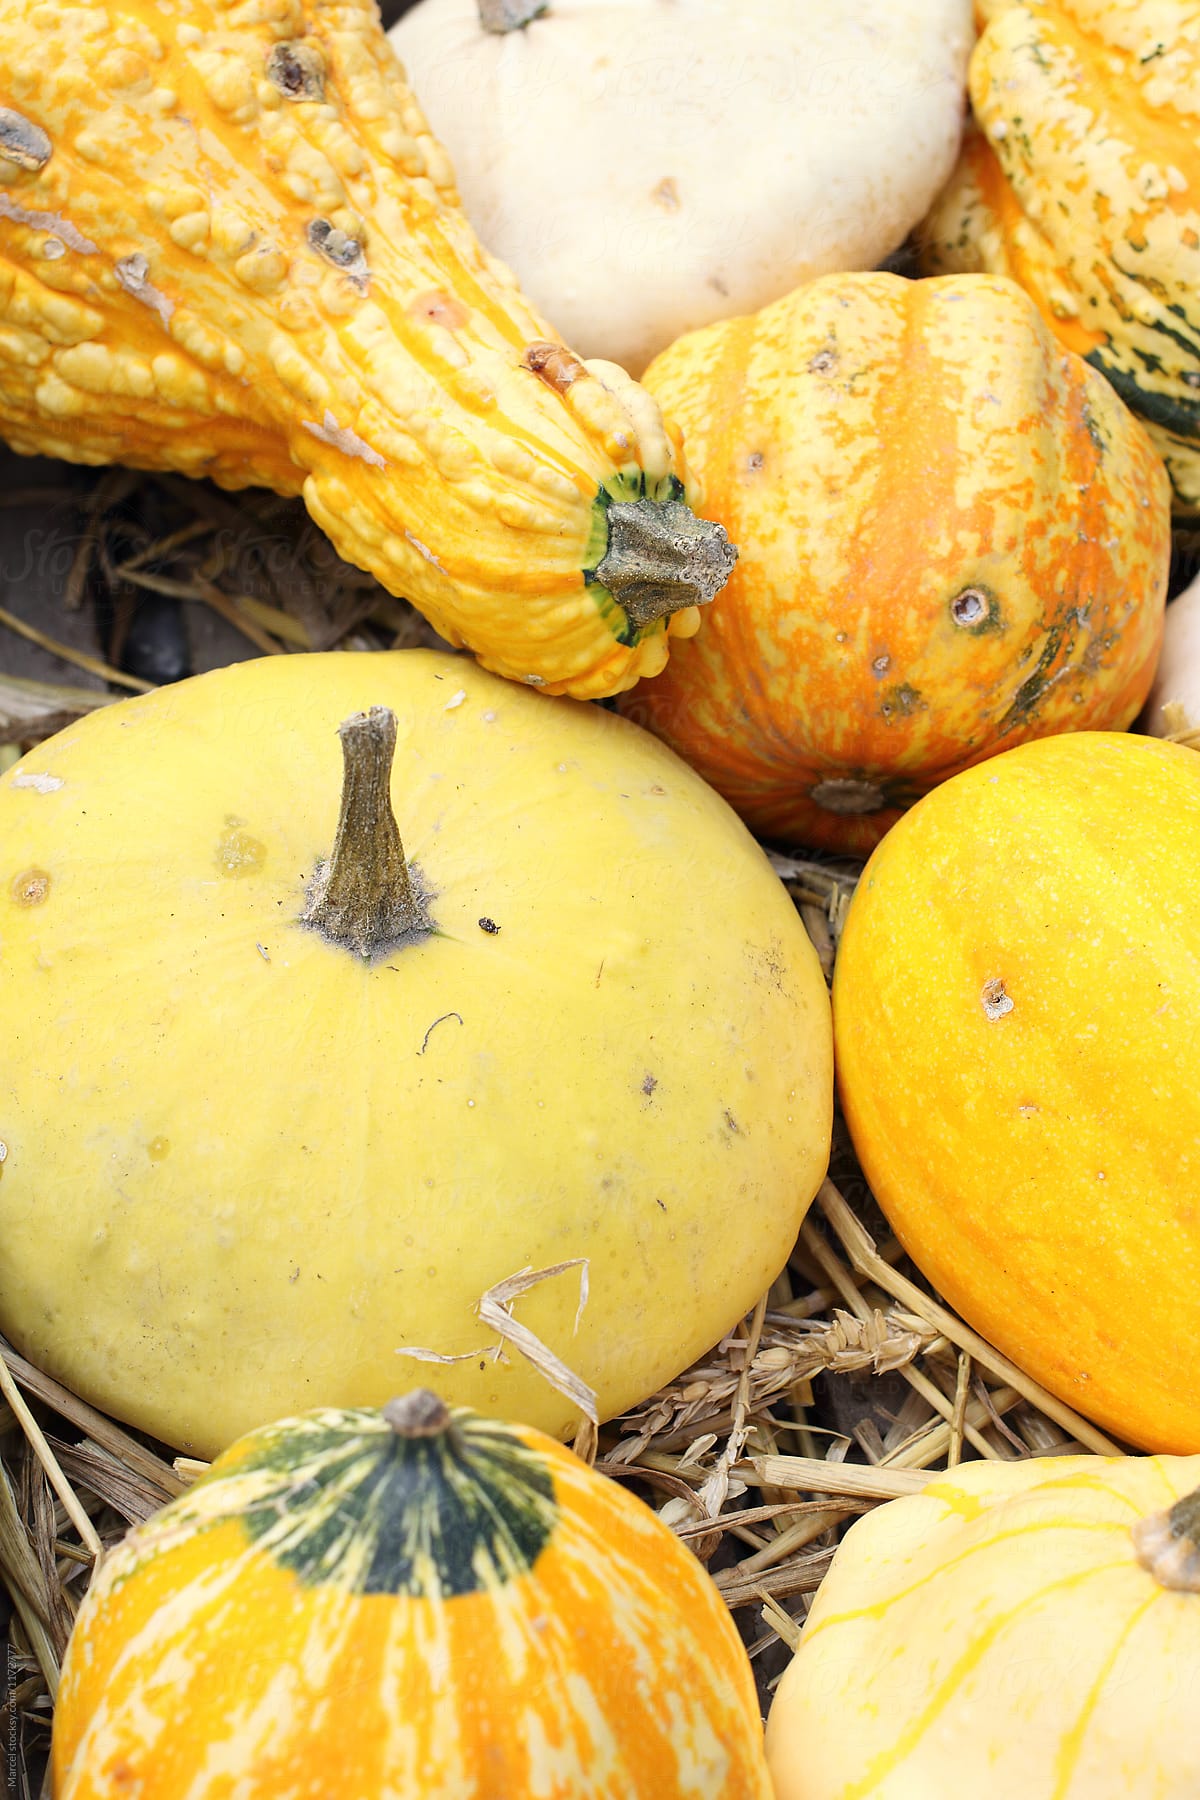 Squash collection on straw